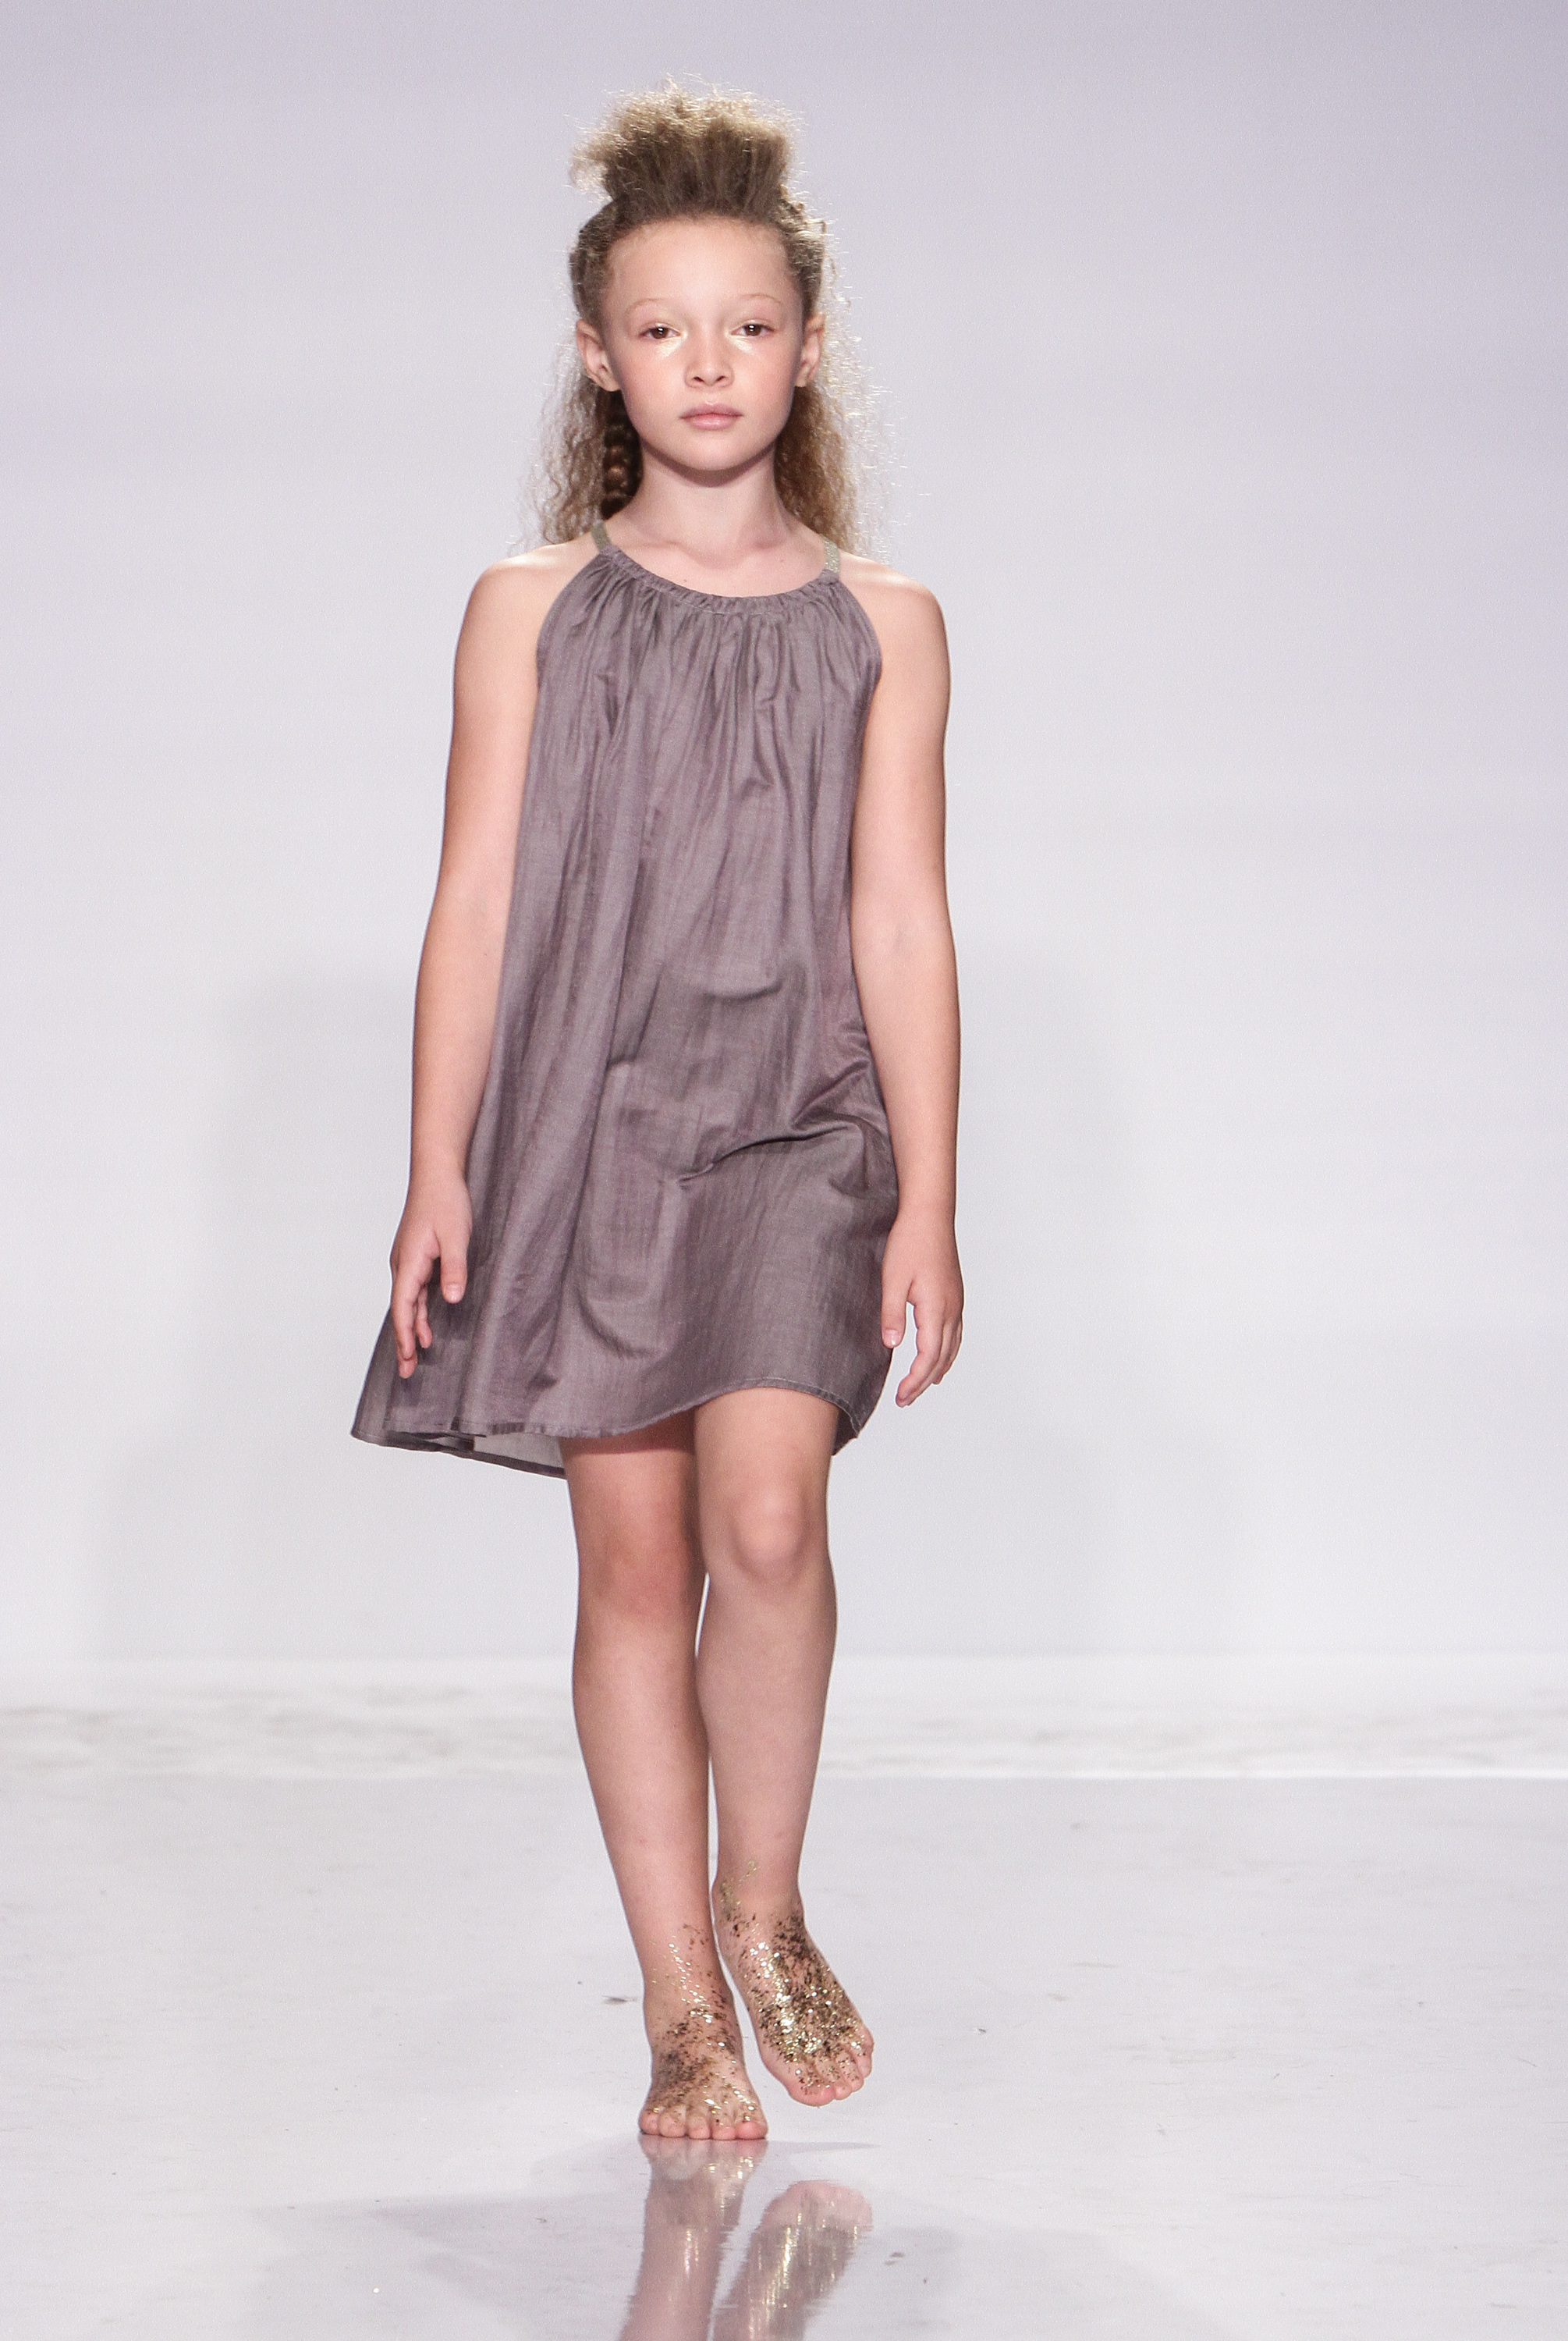 Waling for Pale Cloud at Vogue Bambini NYC